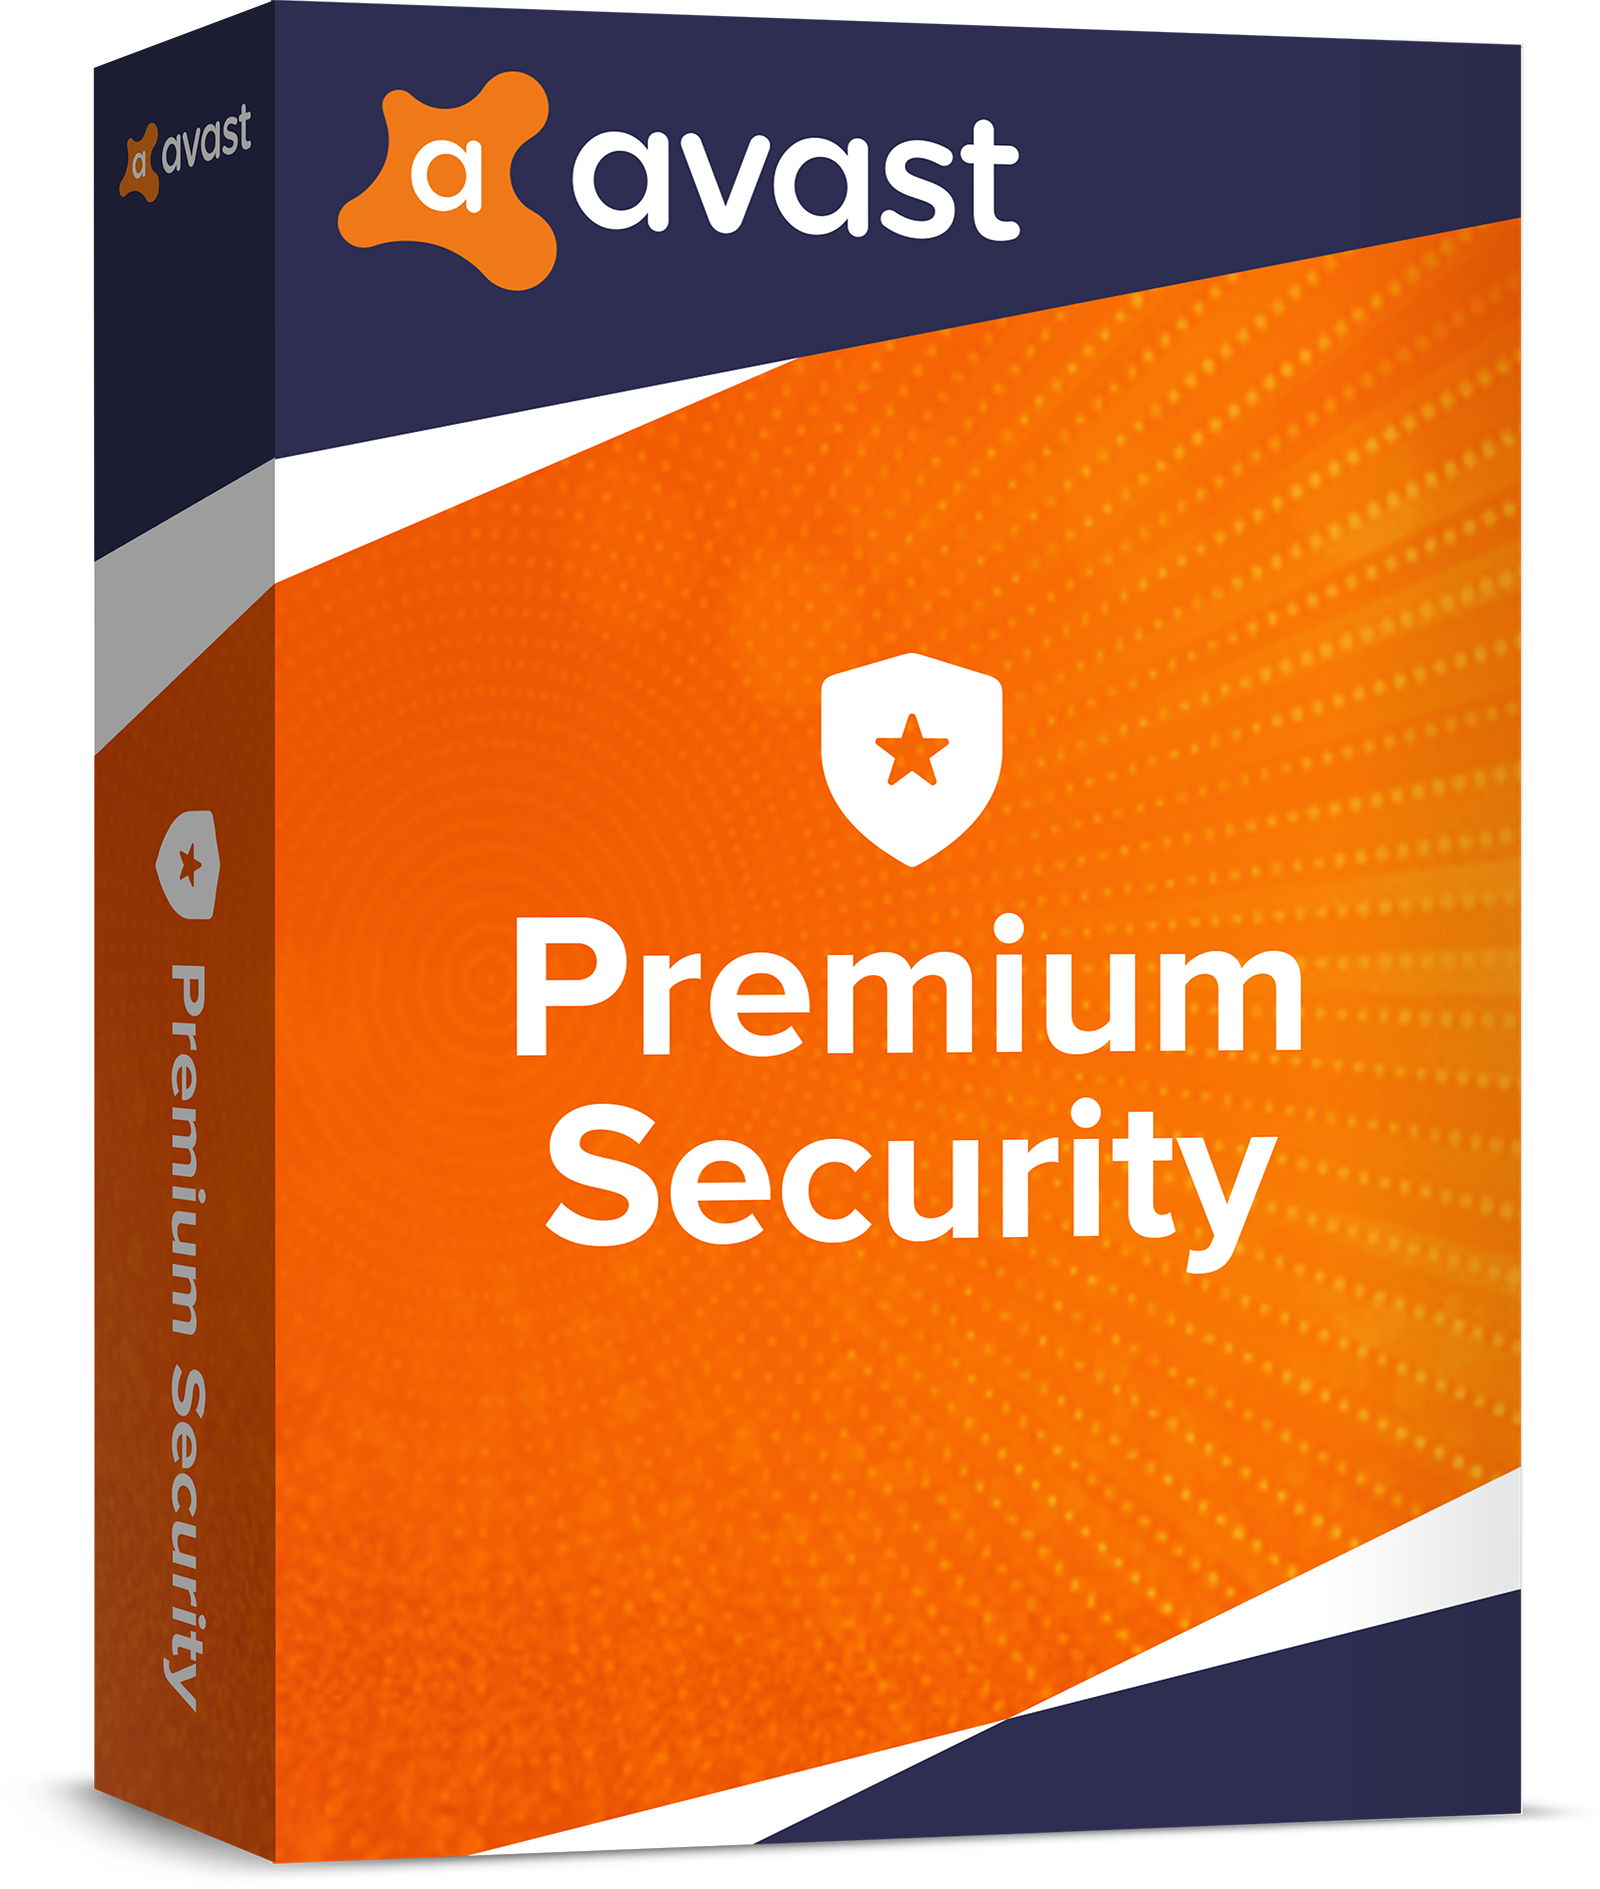 is avast mac good for adware